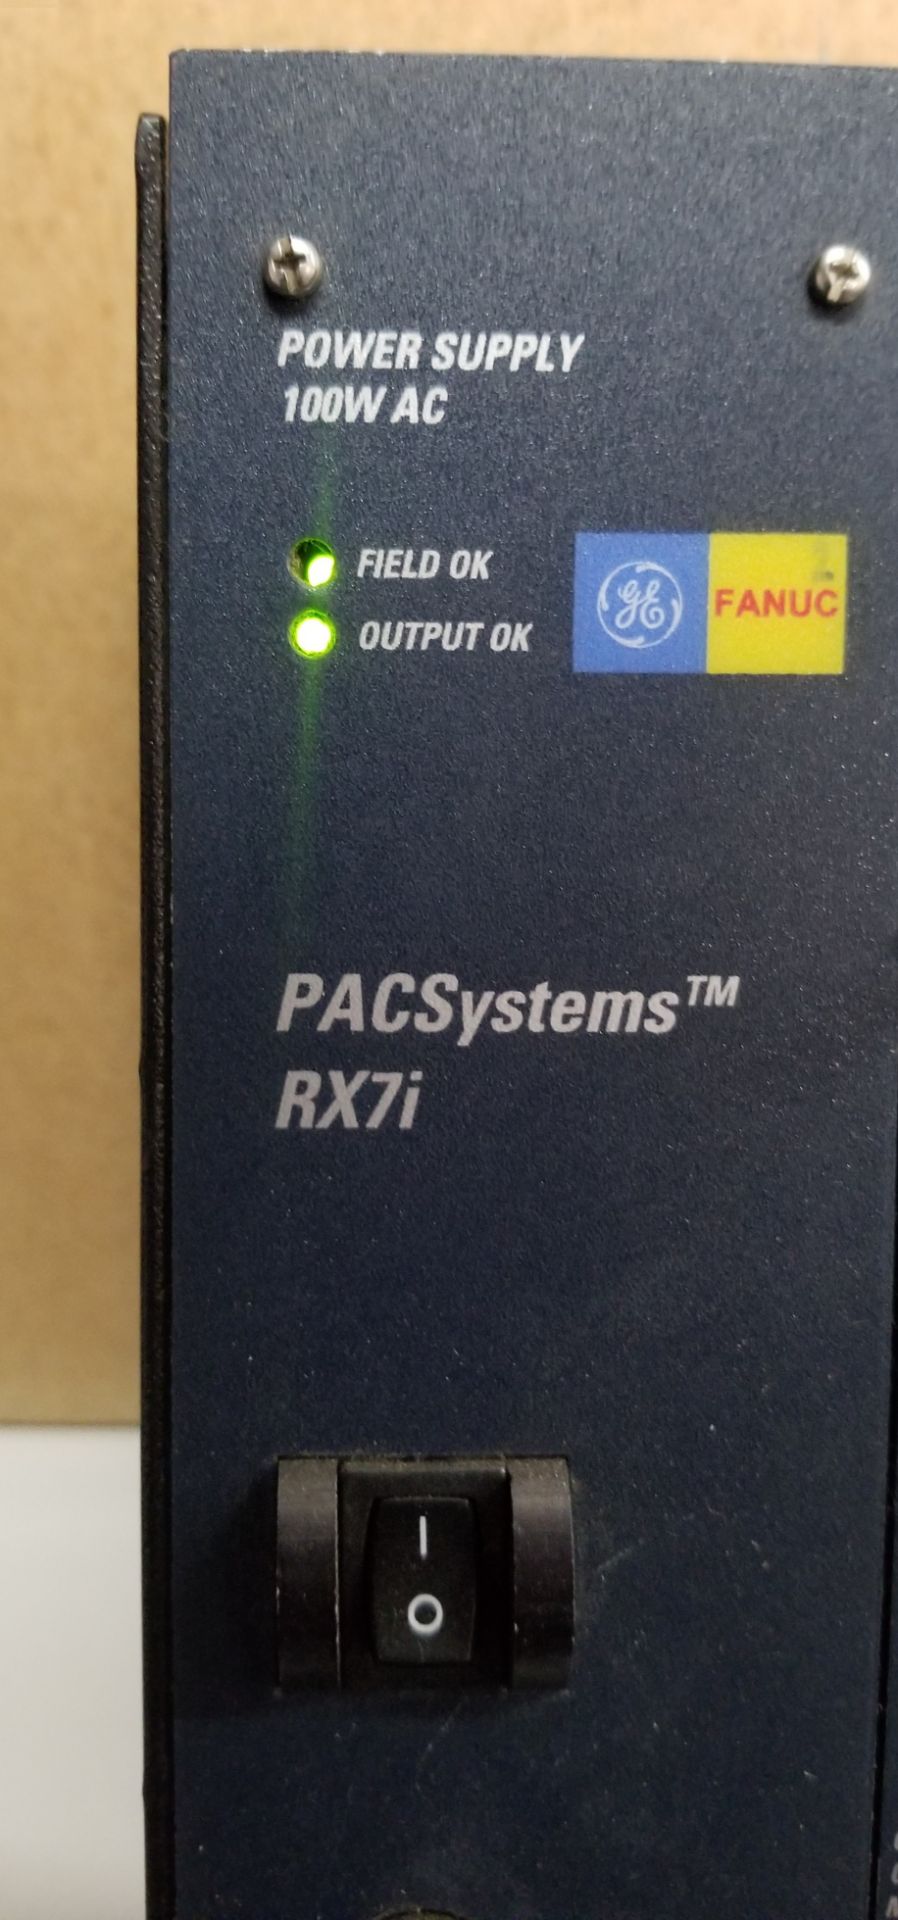 GE FANUC PACSYSTEMS RX7I PLC POWER SUPPLY - Image 5 of 5